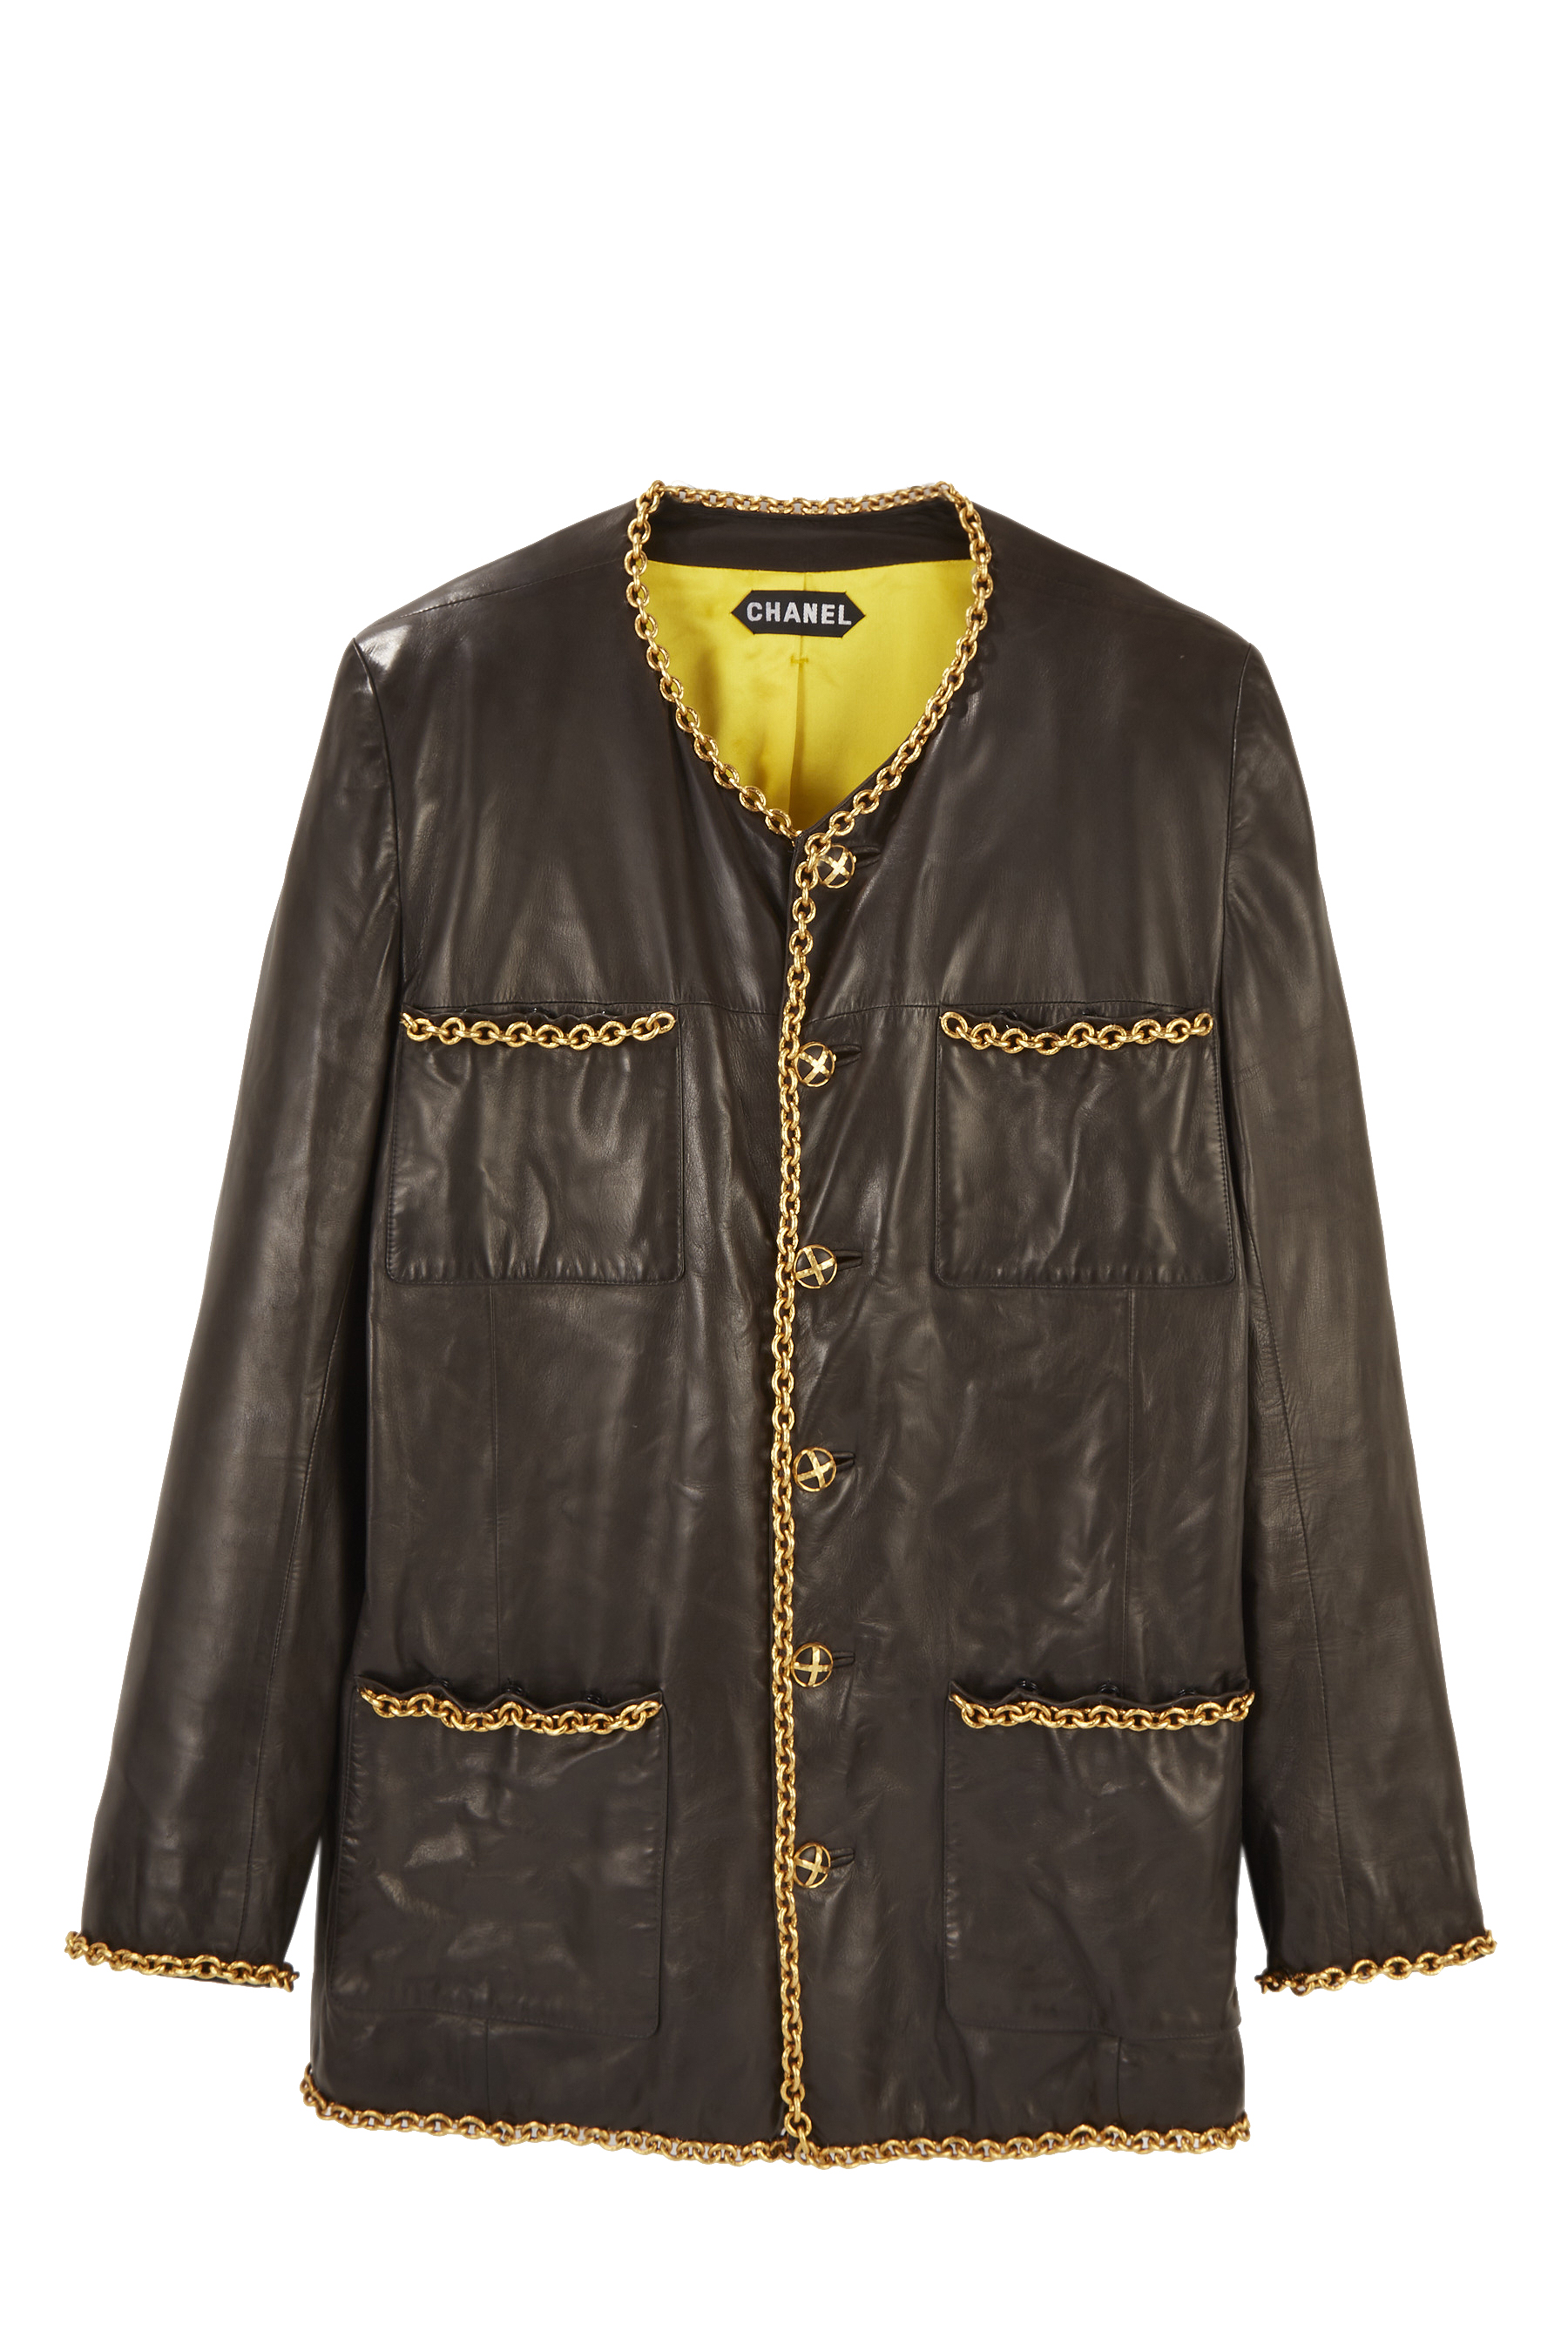 Chanel - André Leon Talley Black Lambskin Leather Chain-Trimmed Couture Jacket